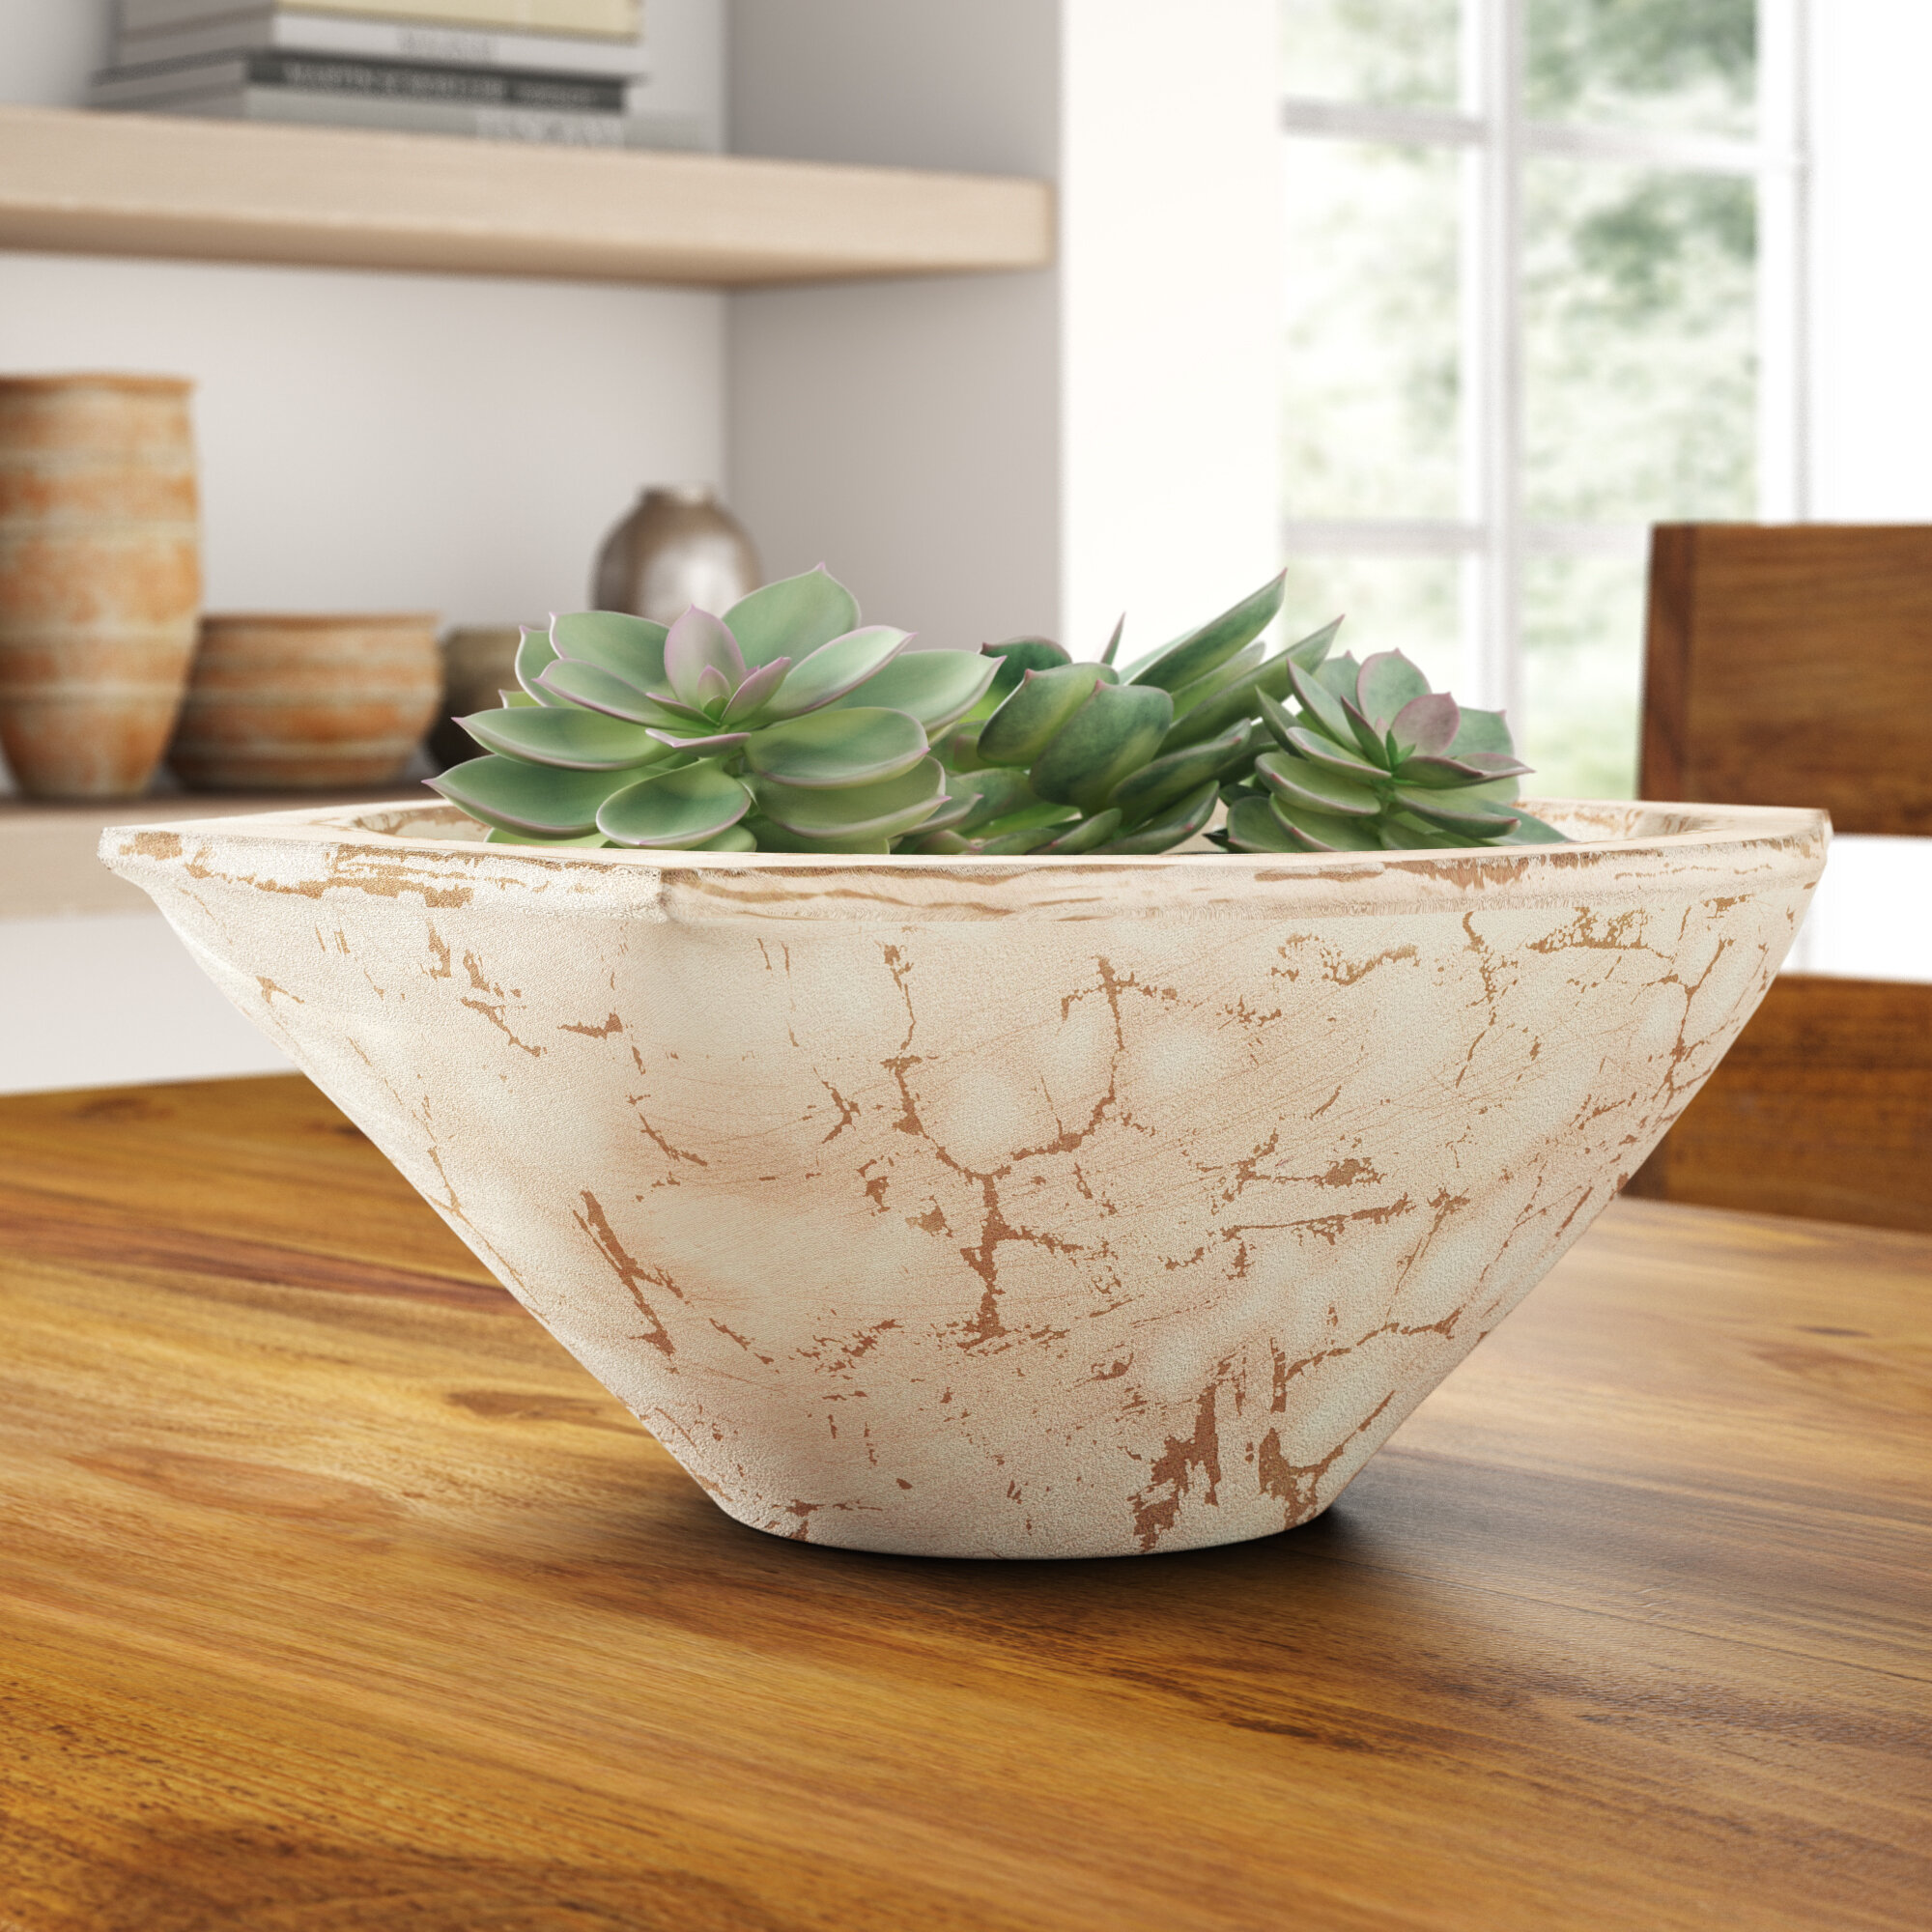 3 Expert Tips To Choose A Decorative Bowl - VisualHunt